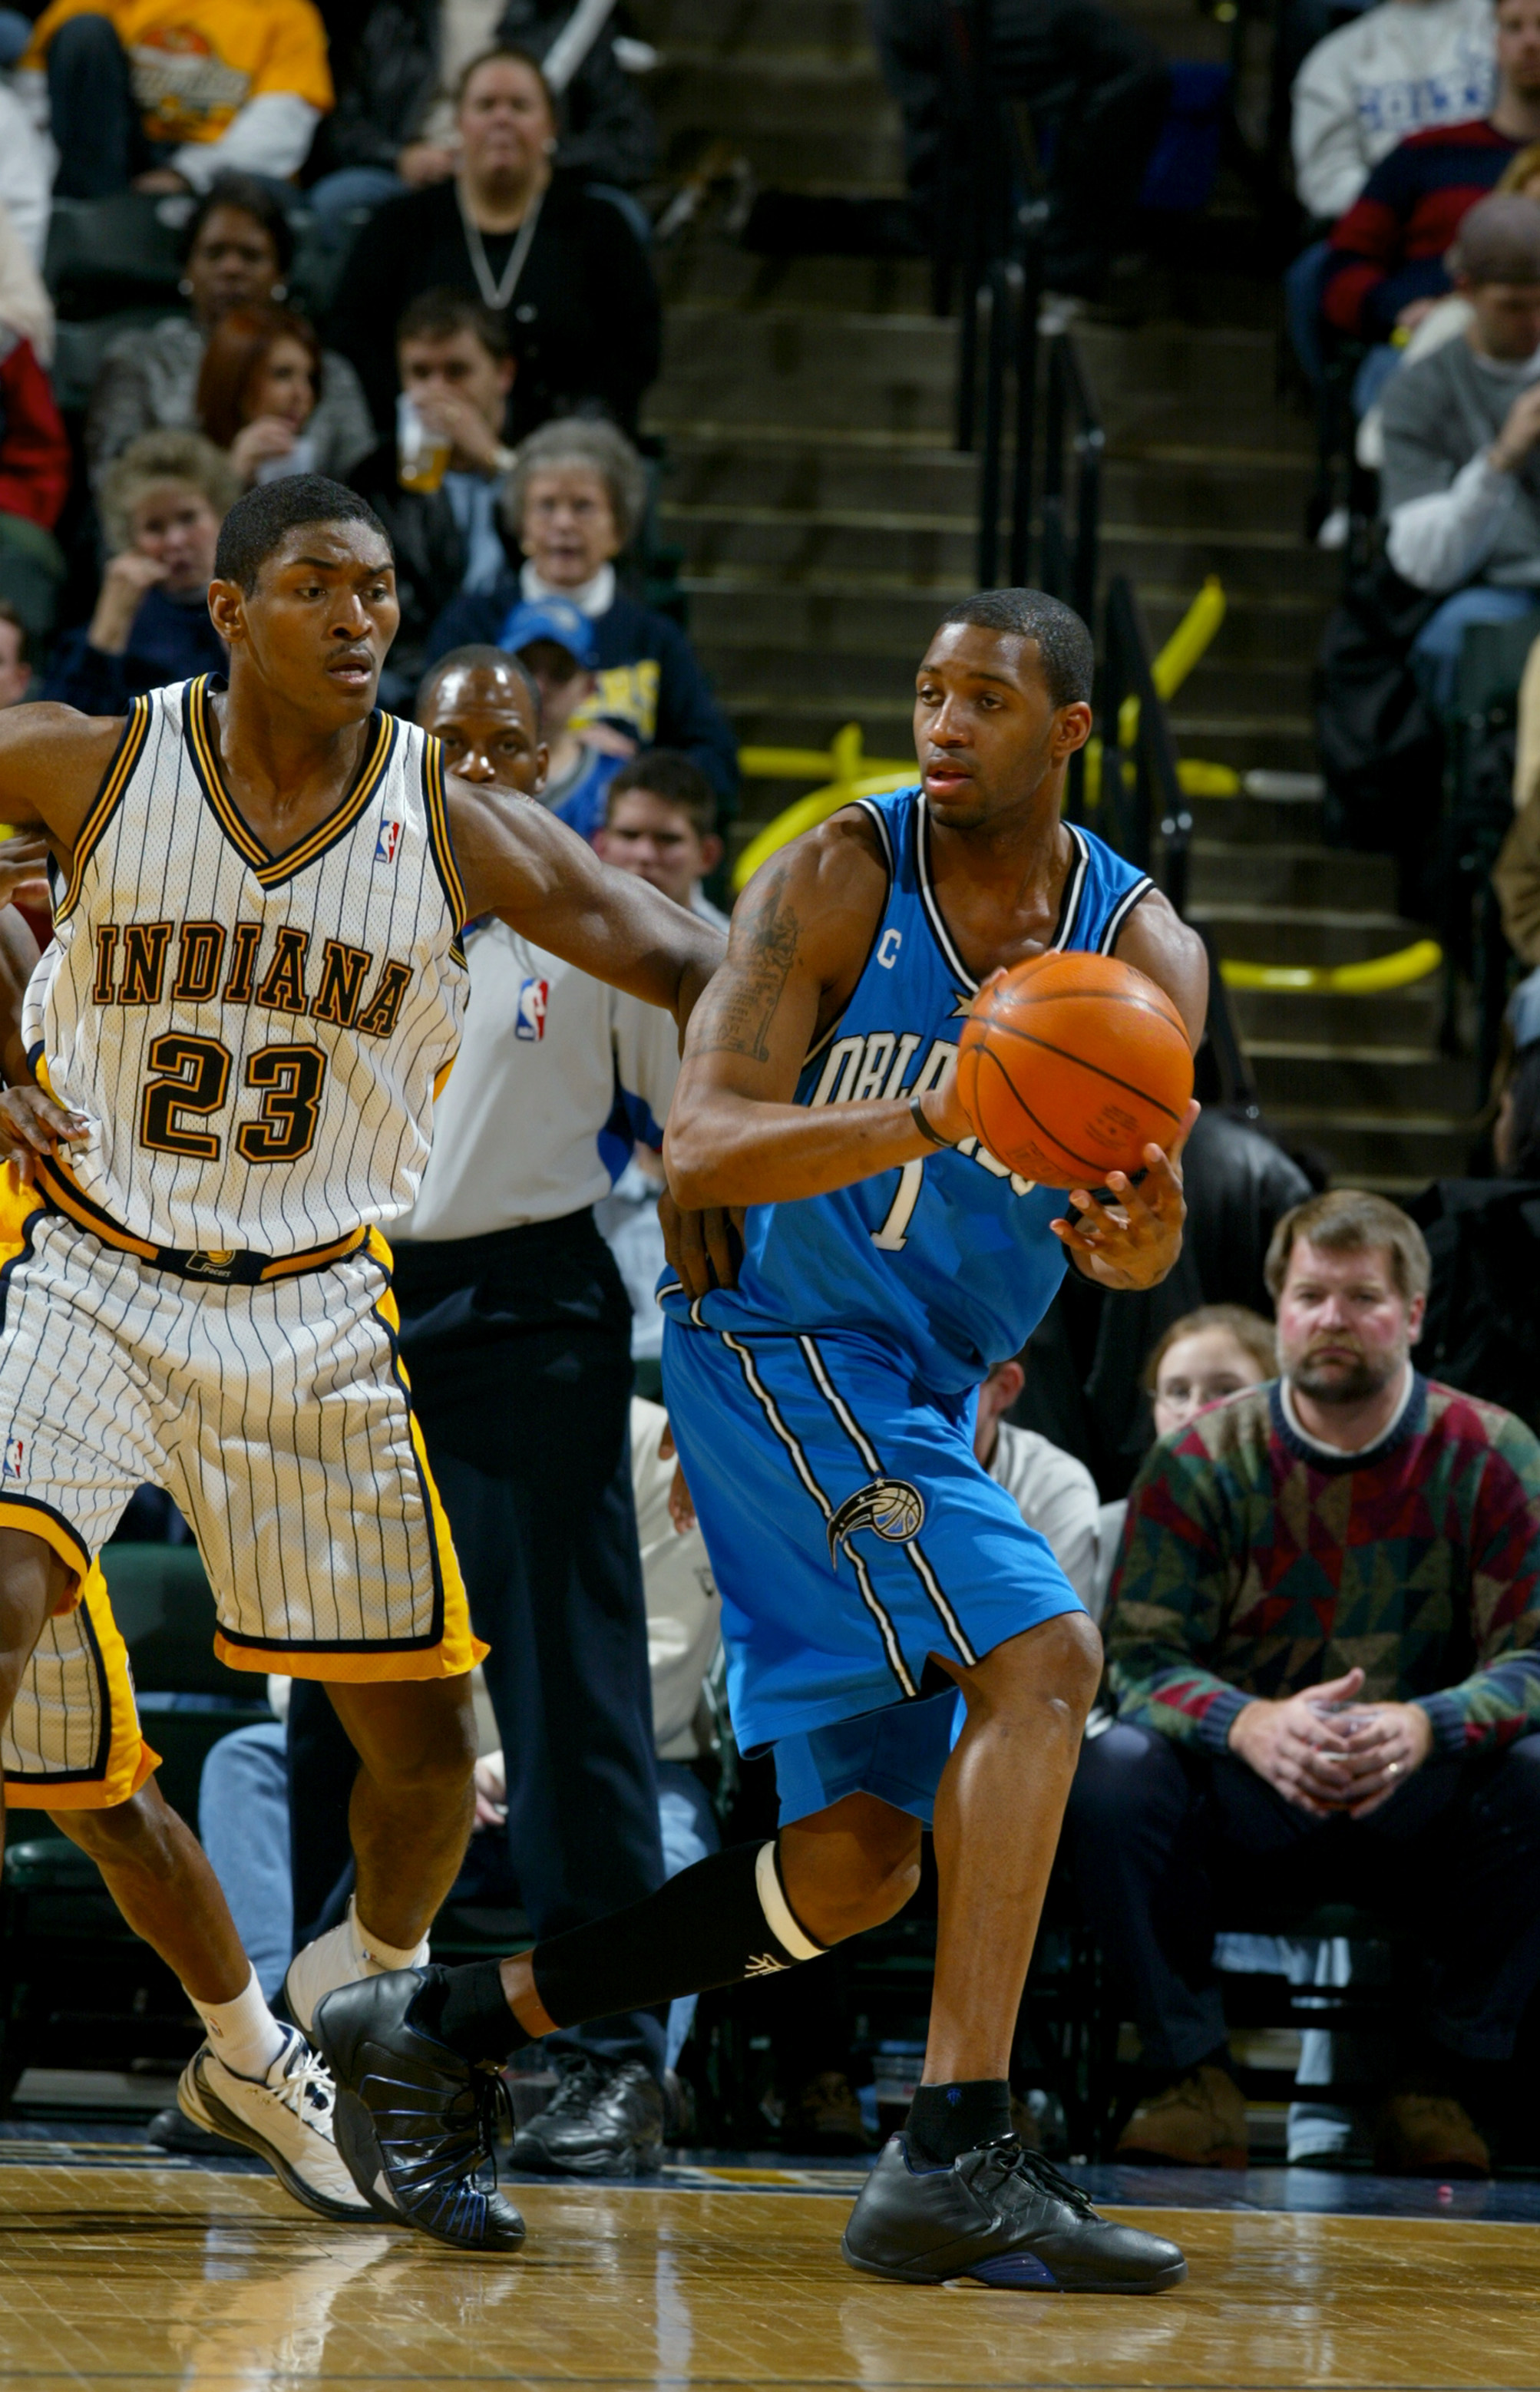 INDIANAPOLIS - DECEMBER 17:  Tracy McGrady #1 of the Orlando Magic looks to pass as he is covered by Ron Artest #23 of the Indiana Pacers on December 17, 2003 at Conseco Fieldhouse in Indianapolis, Indiana.  The Magic won 94-90.  NOTE TO USER: User expres